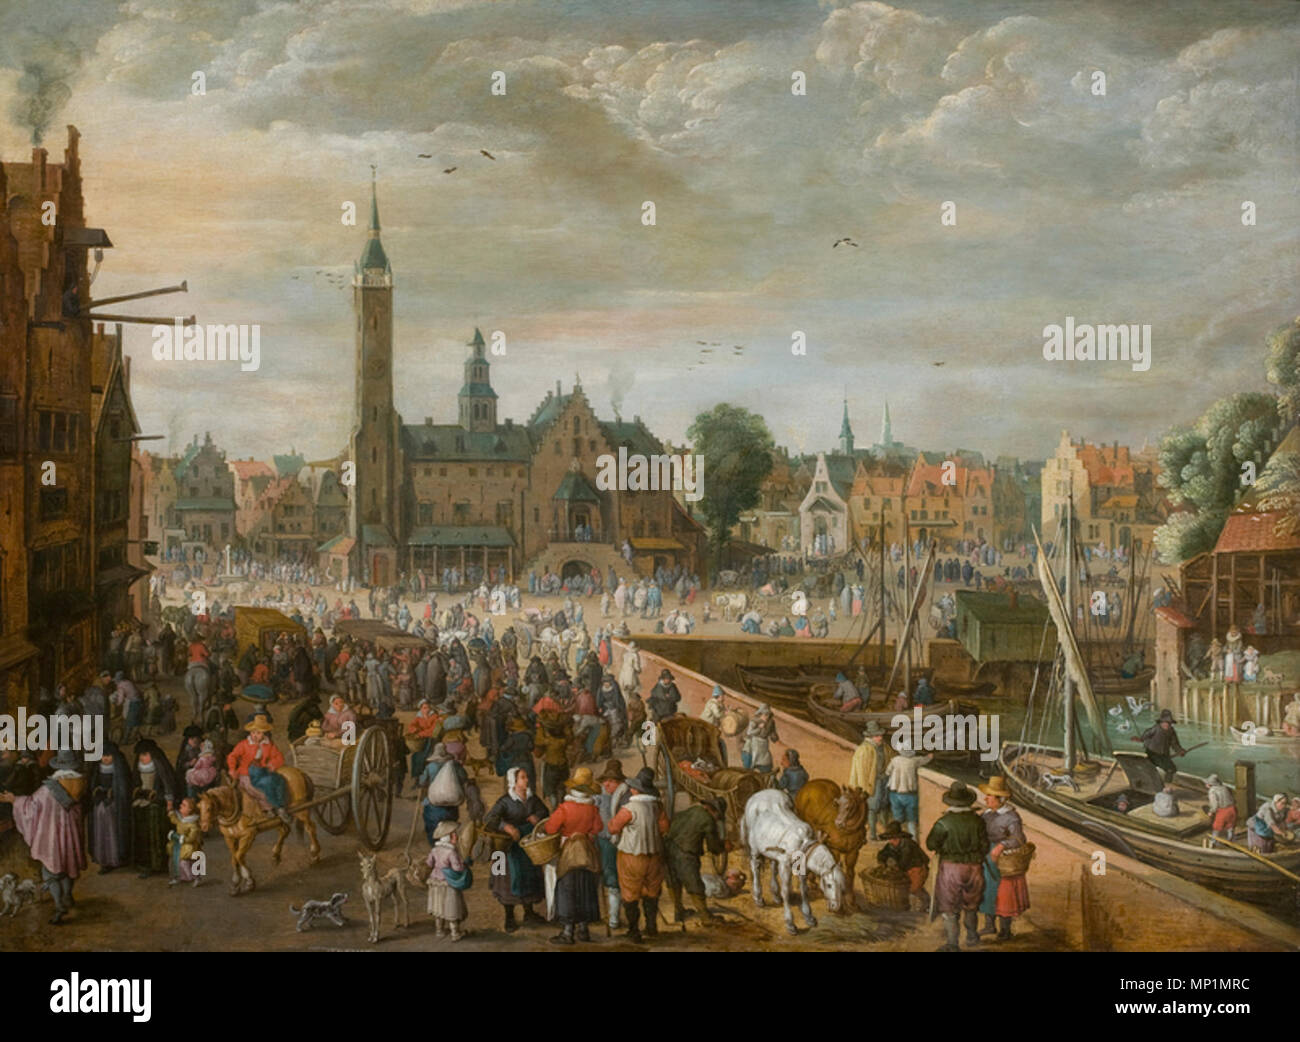 English: Cityscape of the Main Market Square of Lier   between 1622 and 1634.   982 Philippe de Momper - Cityscape of the Main Market Square of Lier Stock Photo